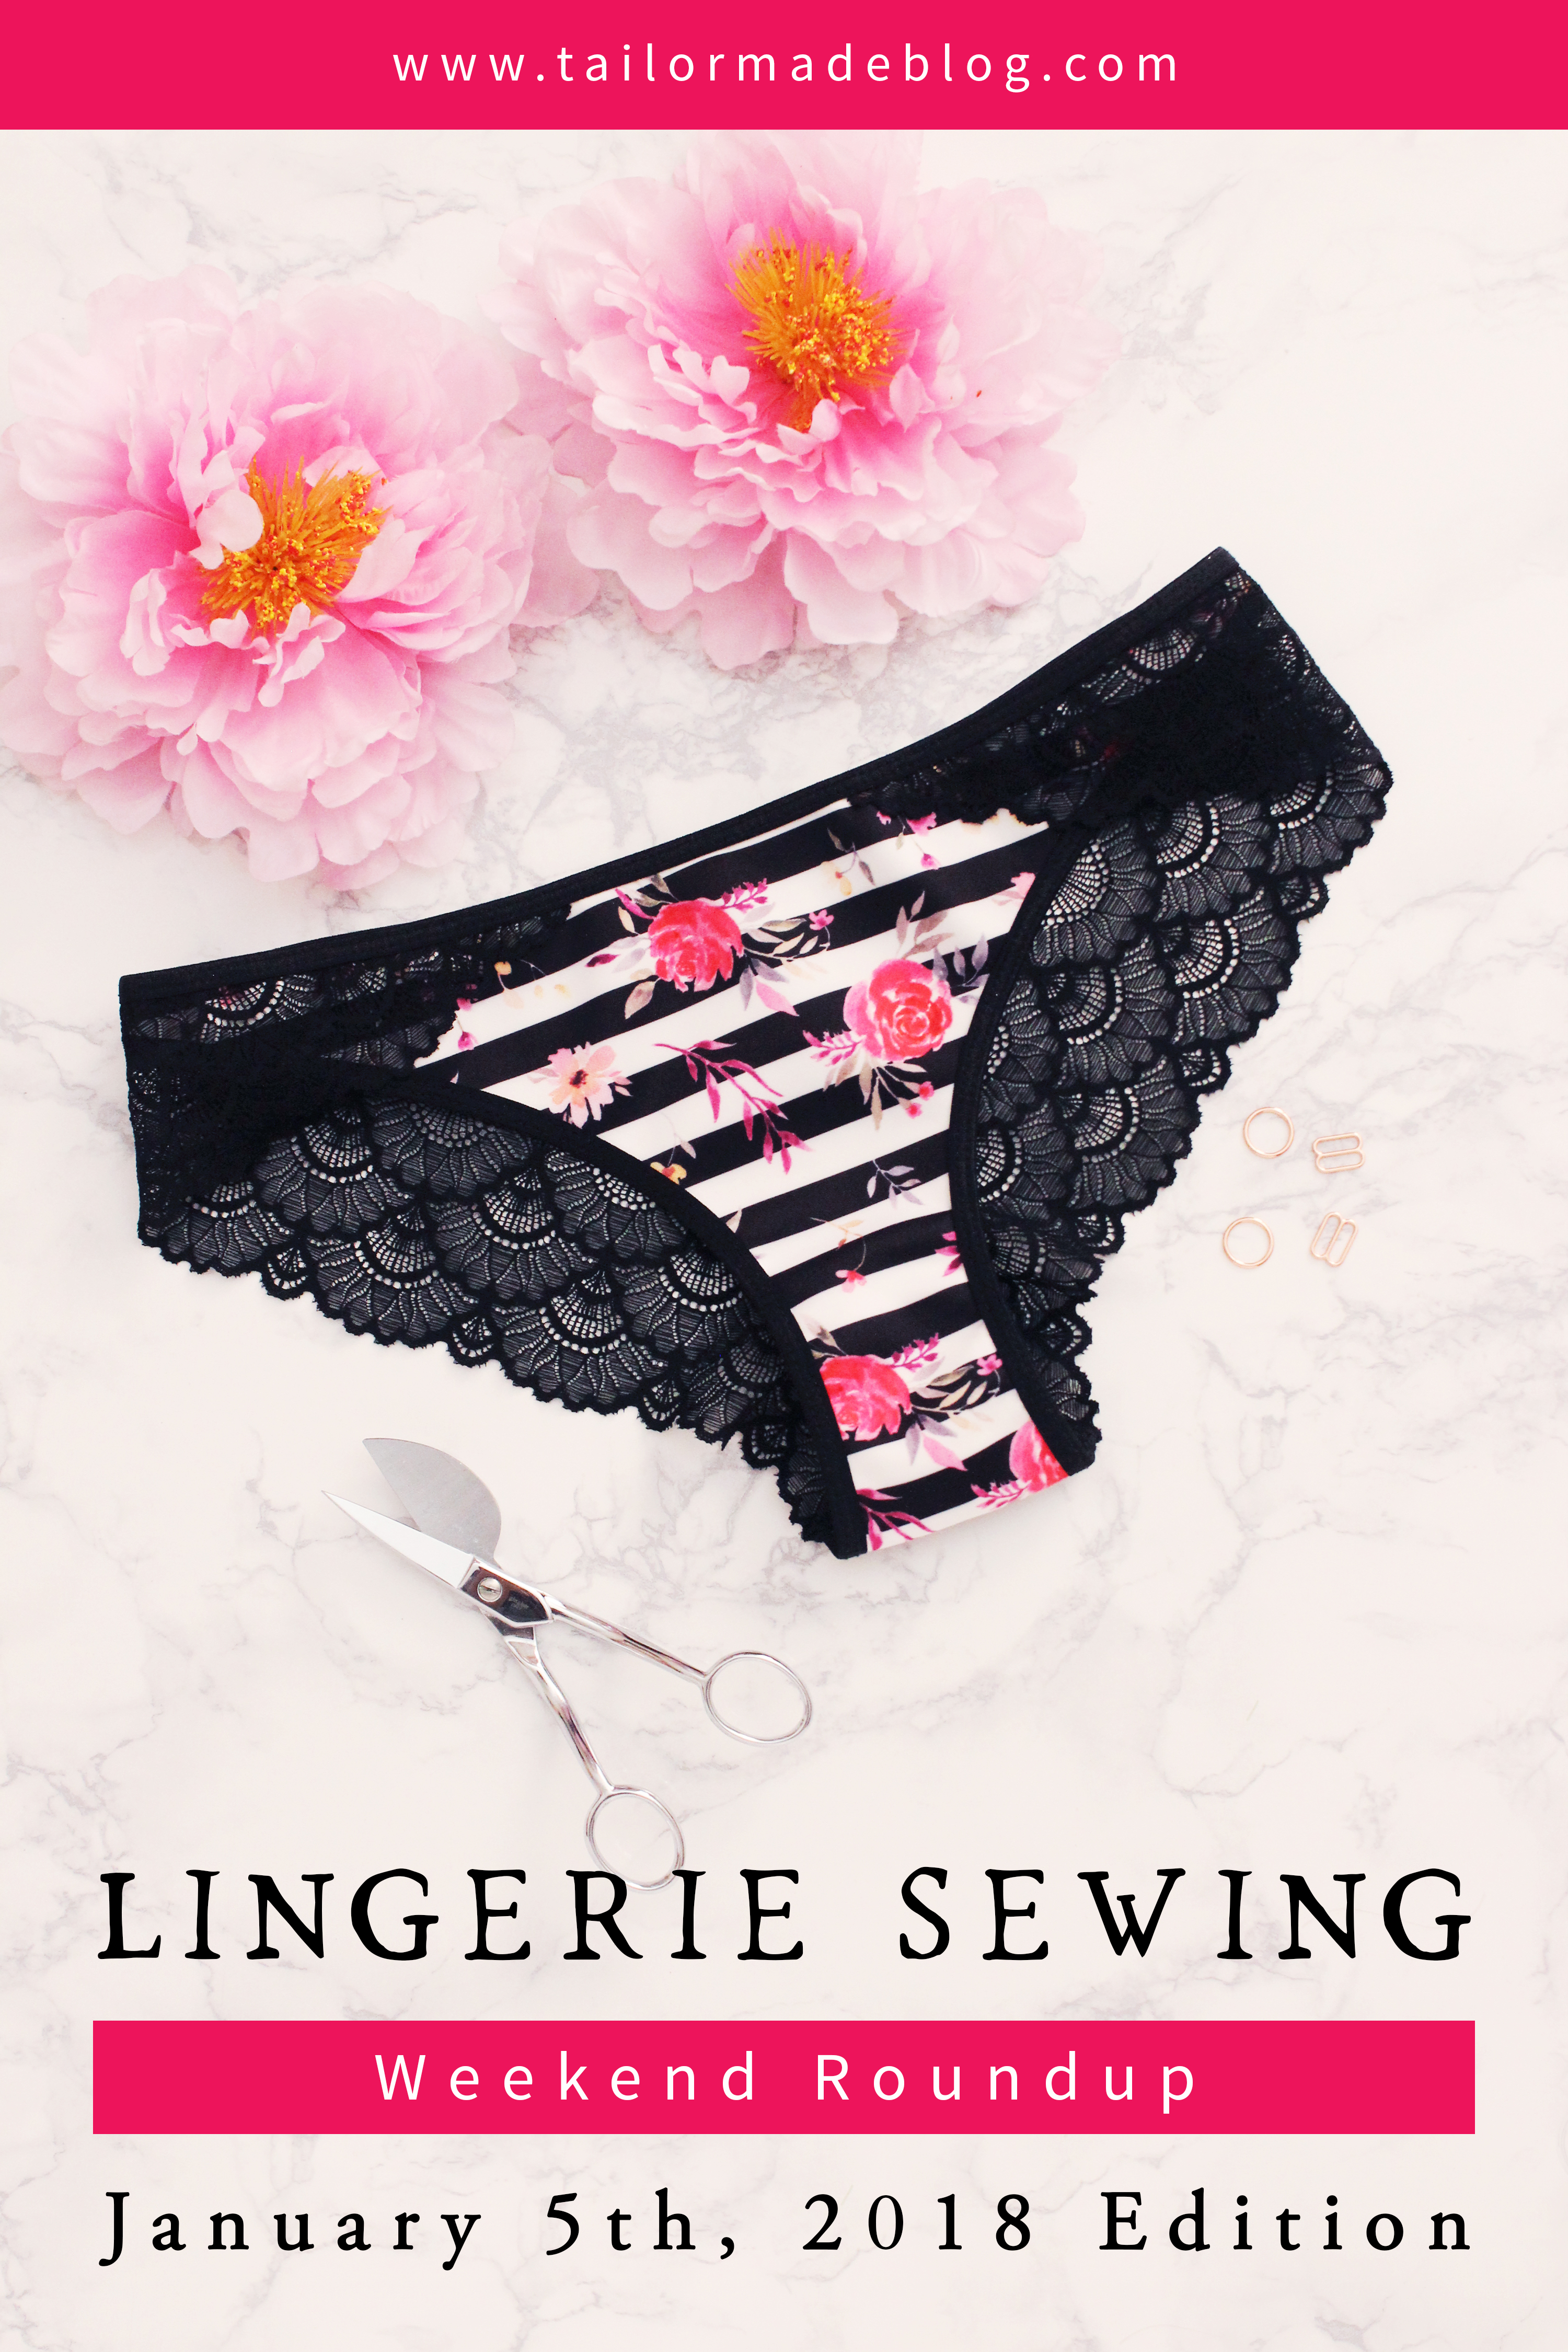 December 1st 2017 Lingerie Sewing Weekend Round Up Latest news and makes and sewing projects from the lingerie sewing bra making community